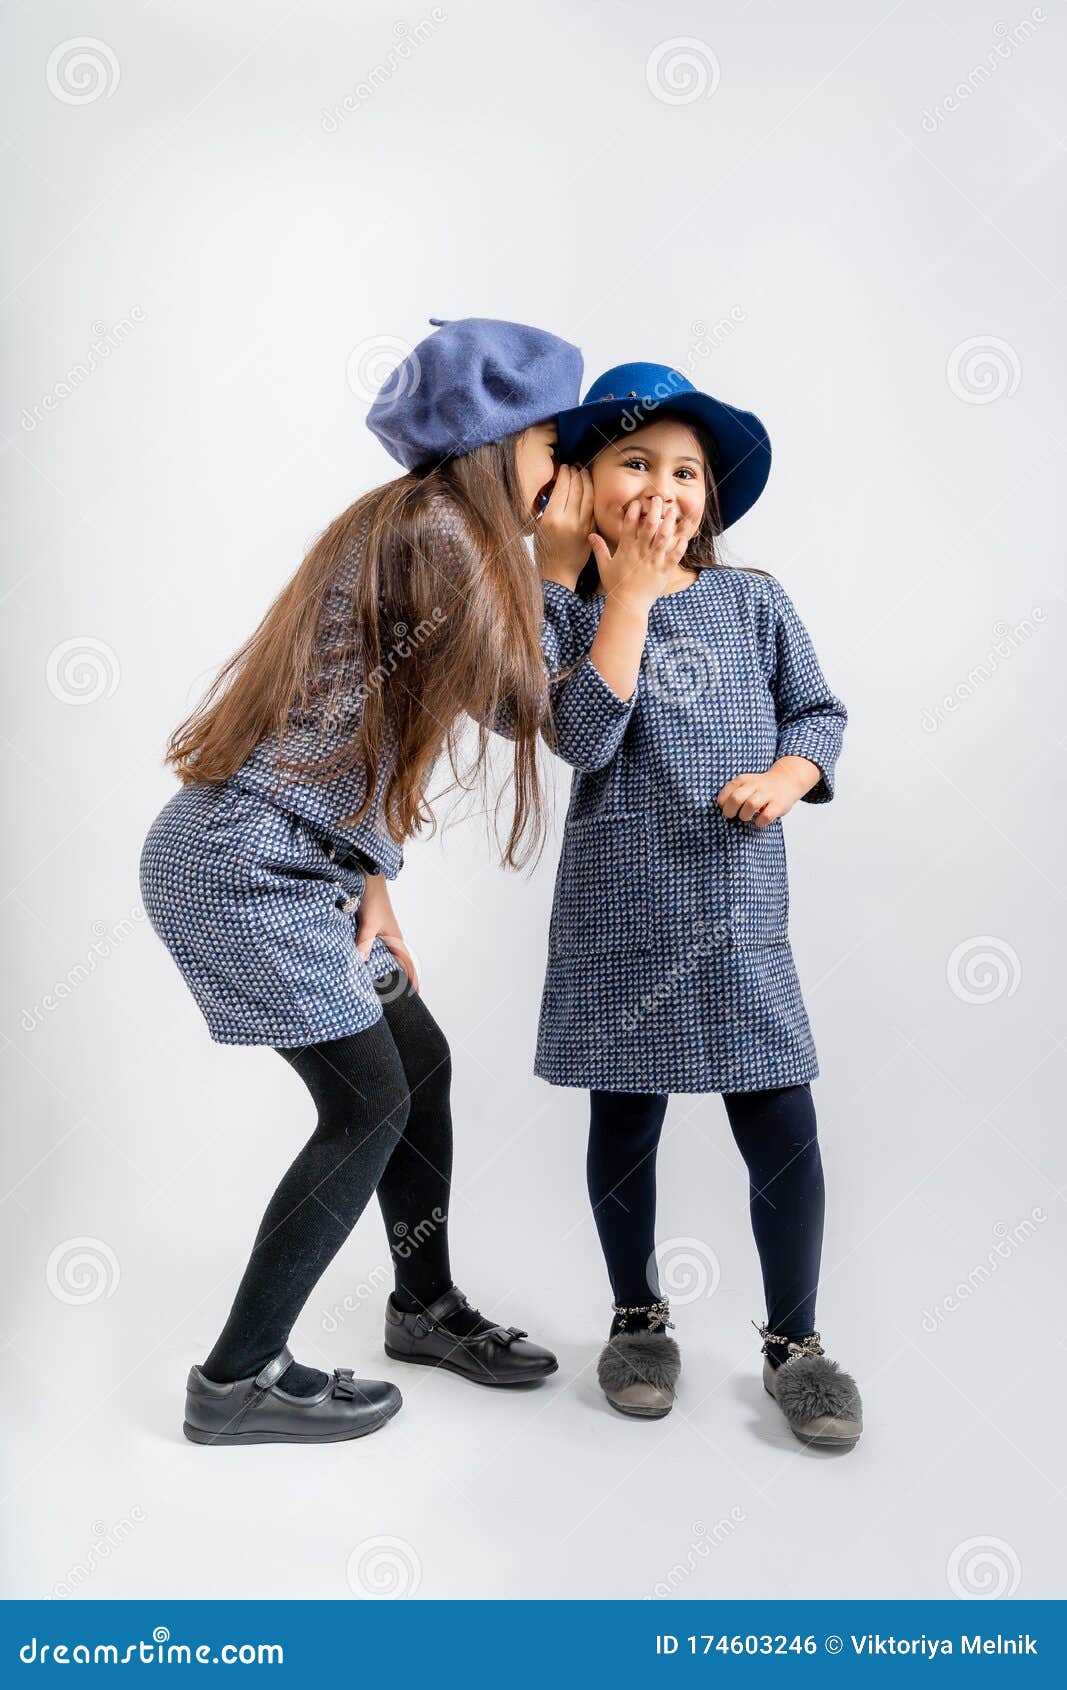 children in a blue jacket with white and black spots, a blue cap, blue shorts with the same spots, black tights, black shoes, a bl